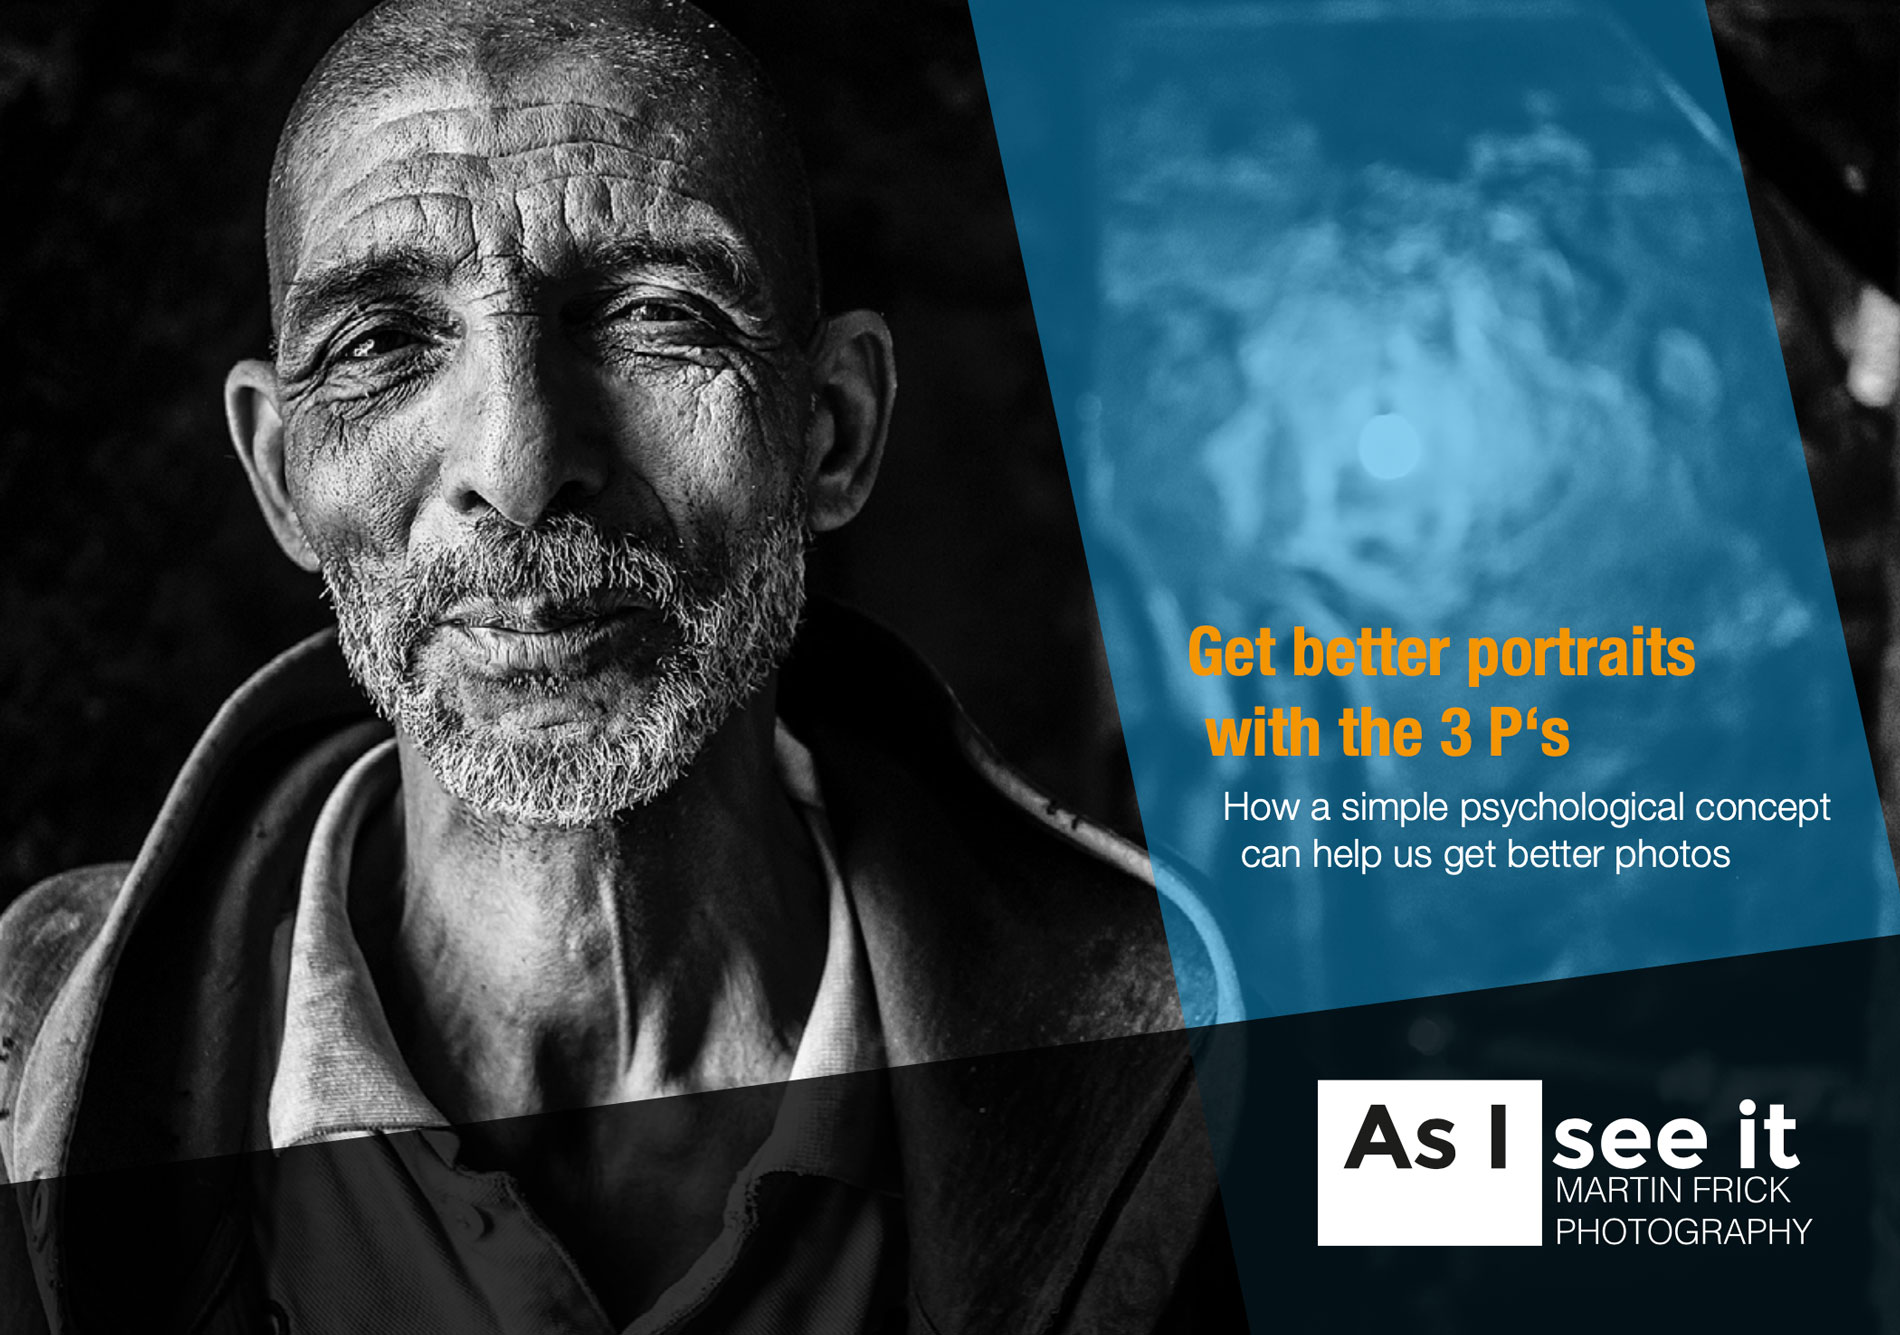 eBook | Get better portraits with the 3 P’s